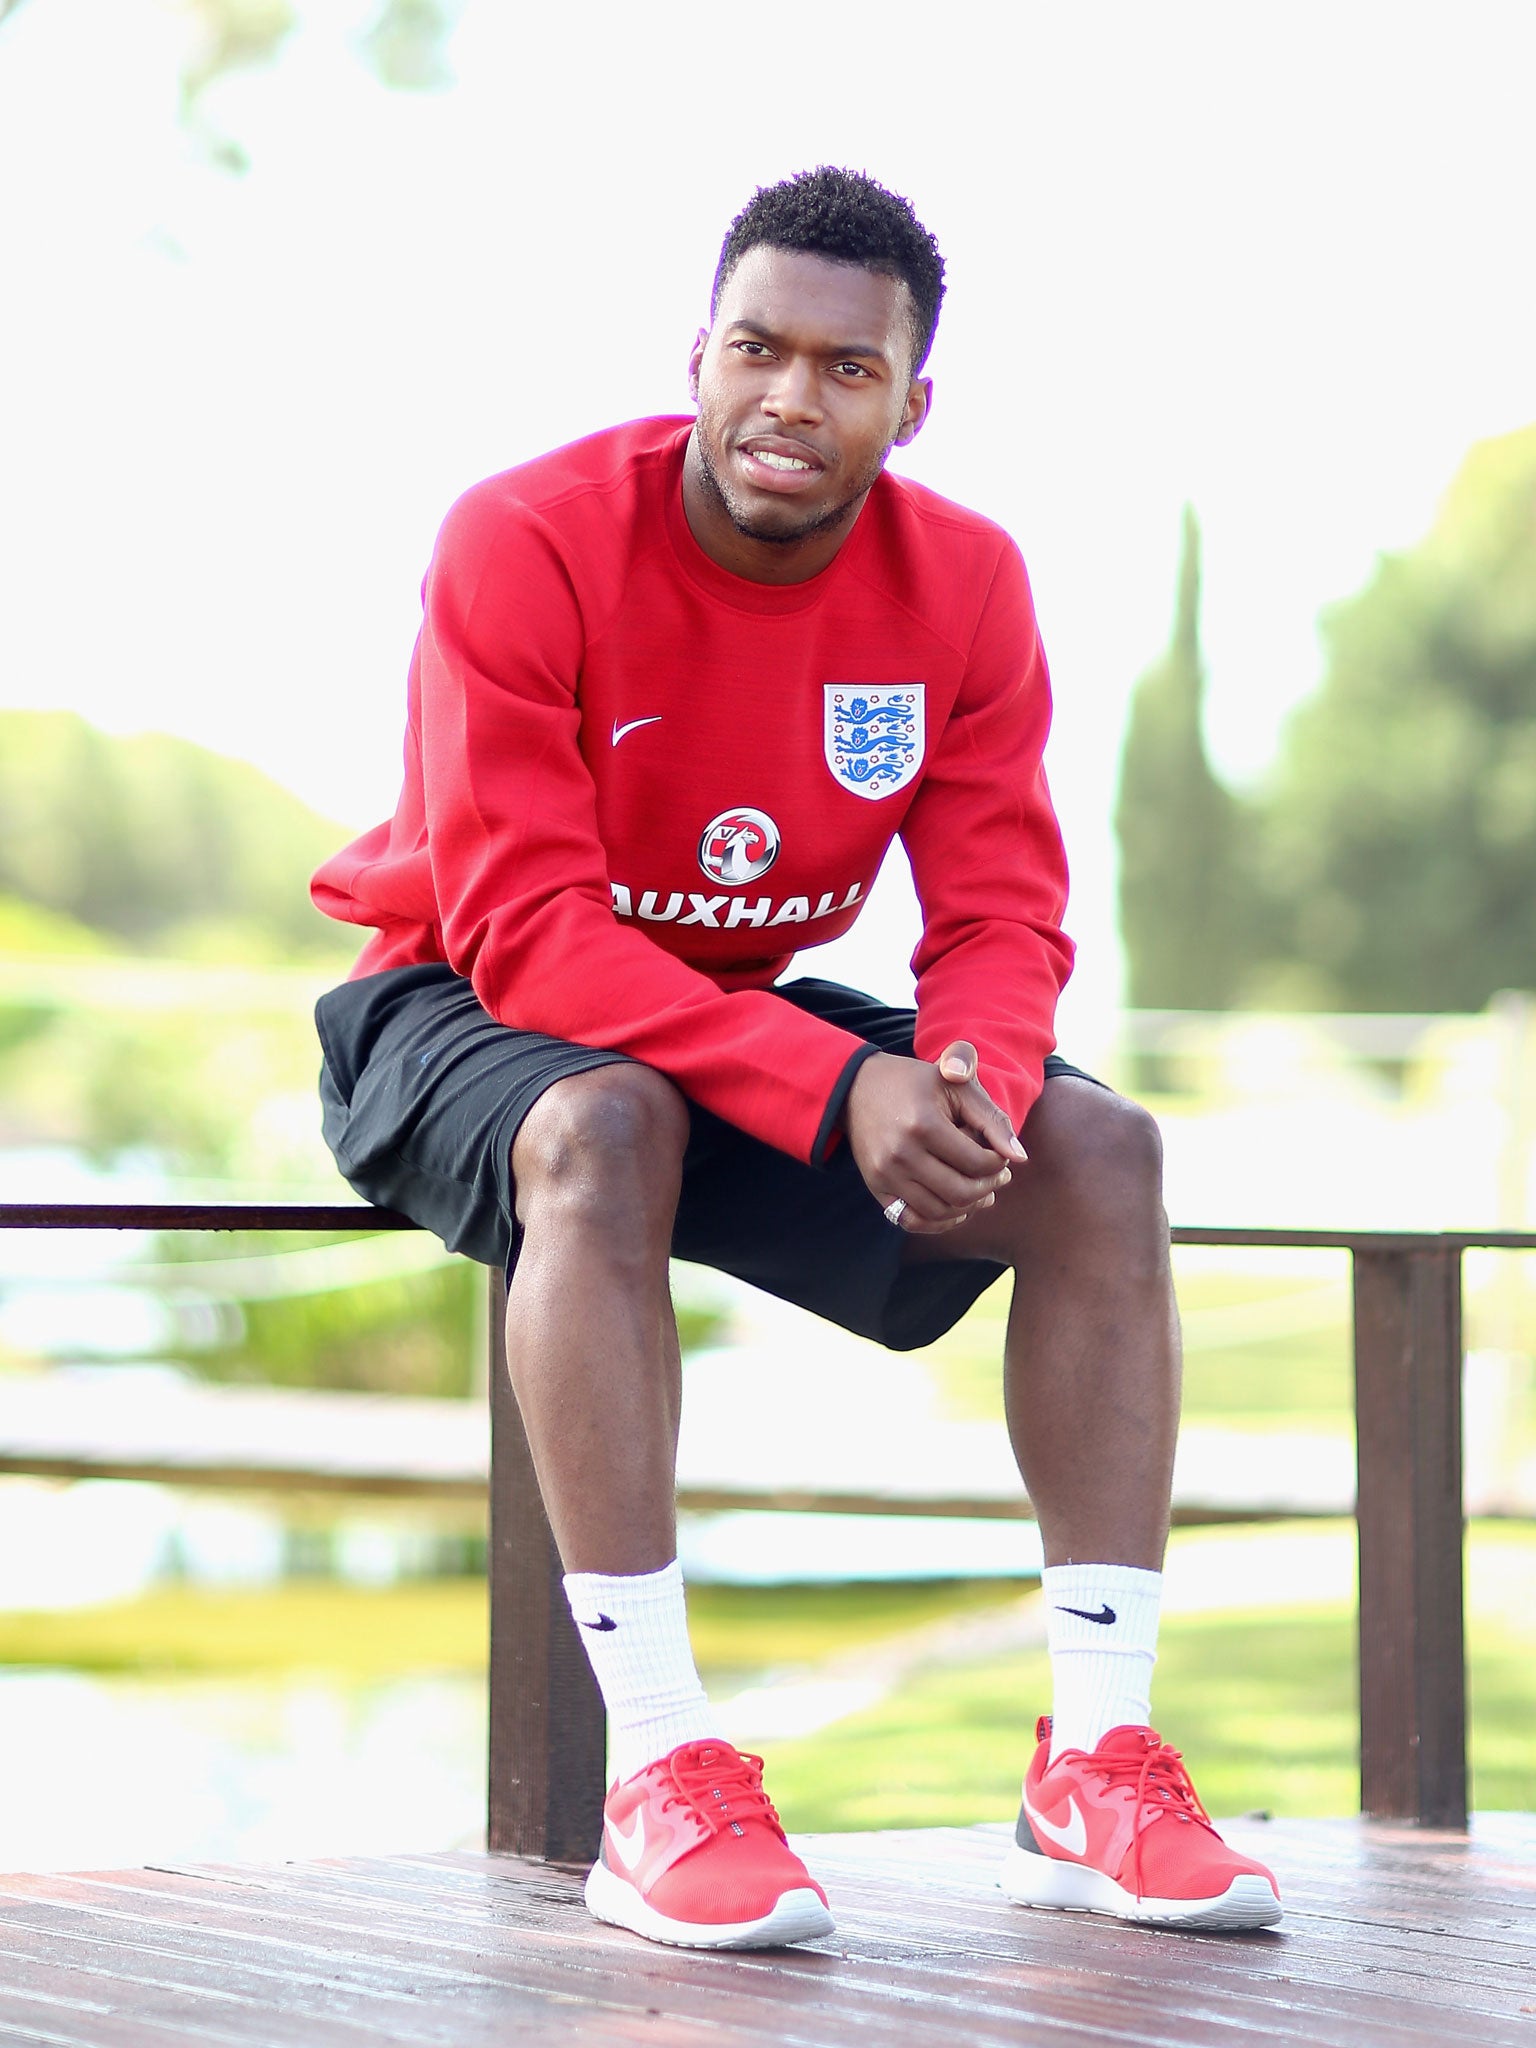 Daniel Sturridge says the failure to win the Premier League with Liverpool is out of his thoughts